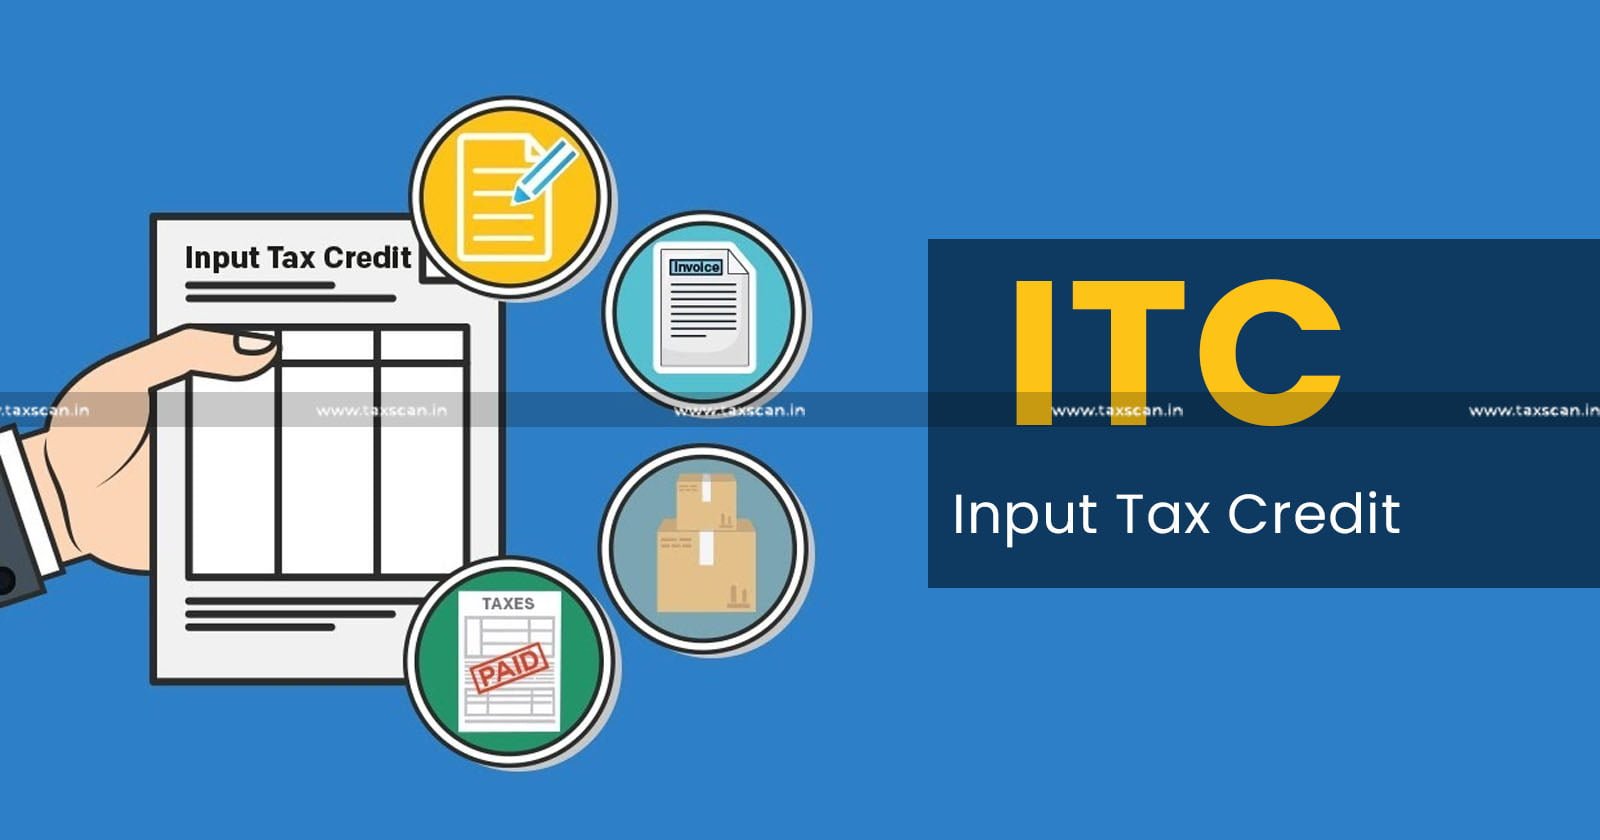 Registered Person cannot Claim ITC - If GST is Not Paid to Government -Claim ITC - Registered Person - ITC - Madras HighCourt - taxscan